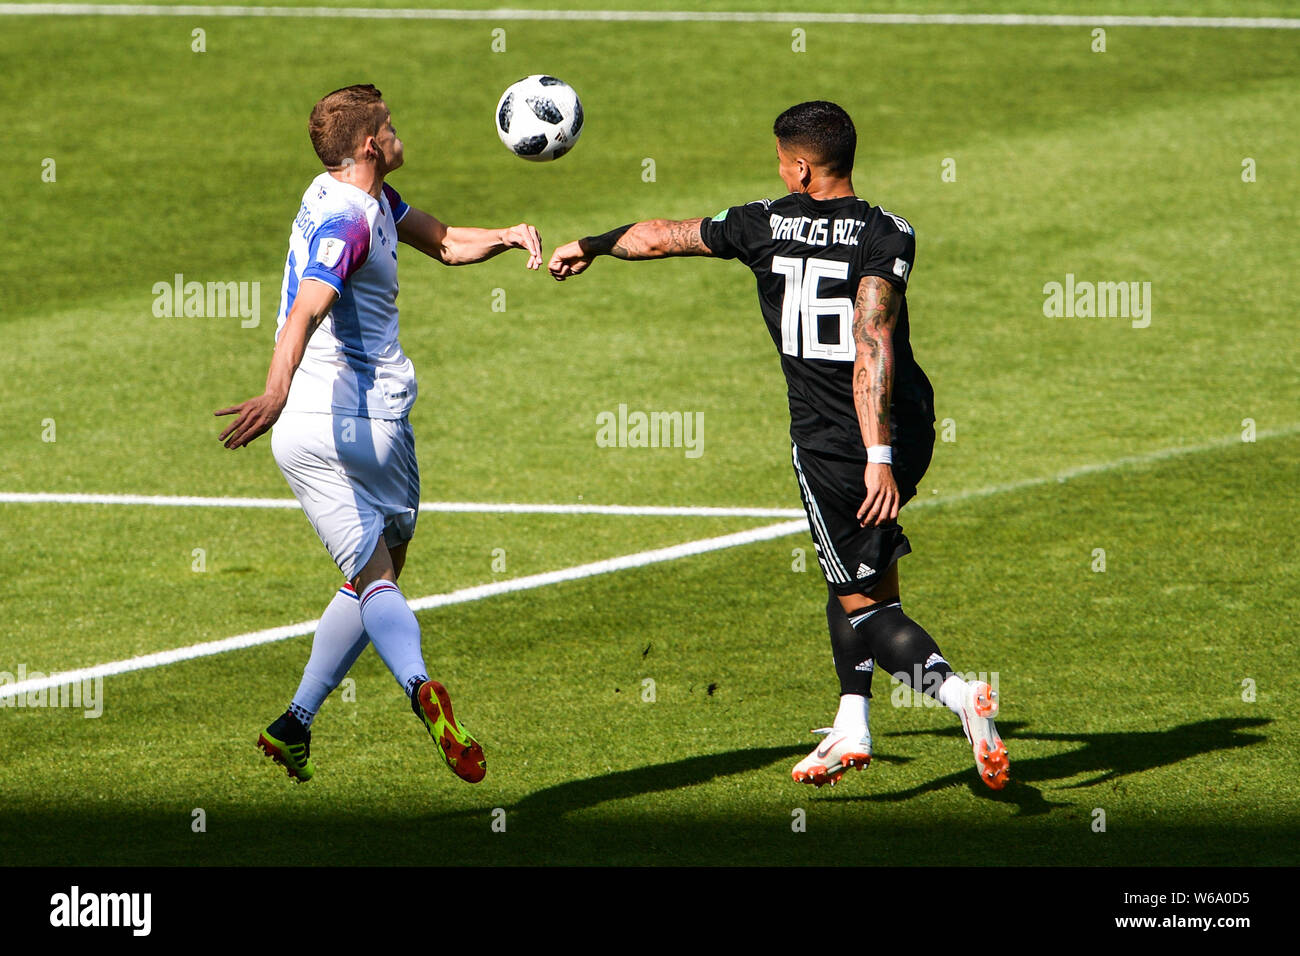 Marcos Rojo of Argentina, right, challenges a player of Iceland in their Group D match during the 2018 FIFA World Cup in Moscow, Russia, 16 June 2018. Stock Photo